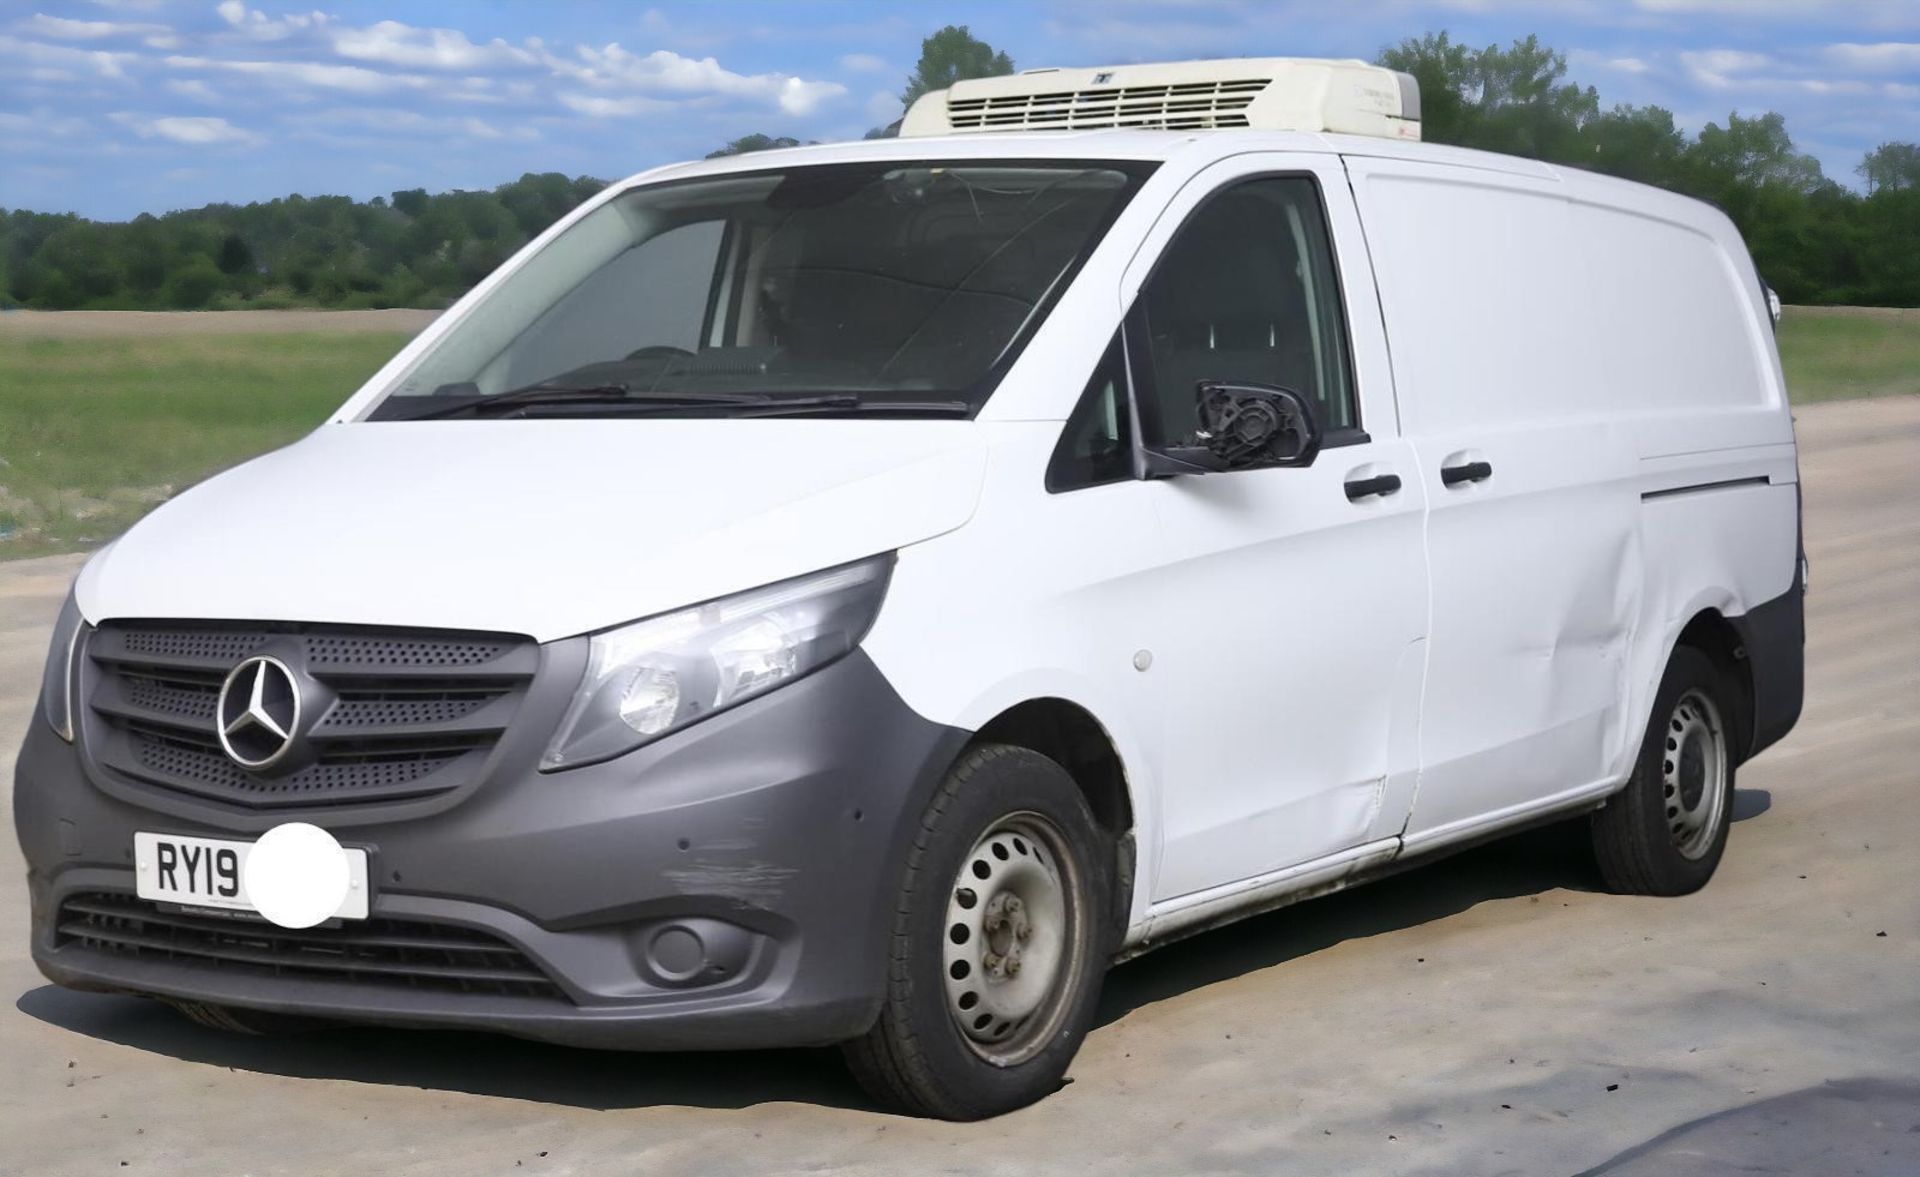 2019 MERCEDES BENZ VITO LWB FRIDGE VAN 114 CDI - YOUR RELIABLE REFRIGERATED SOLUTION - Image 6 of 12